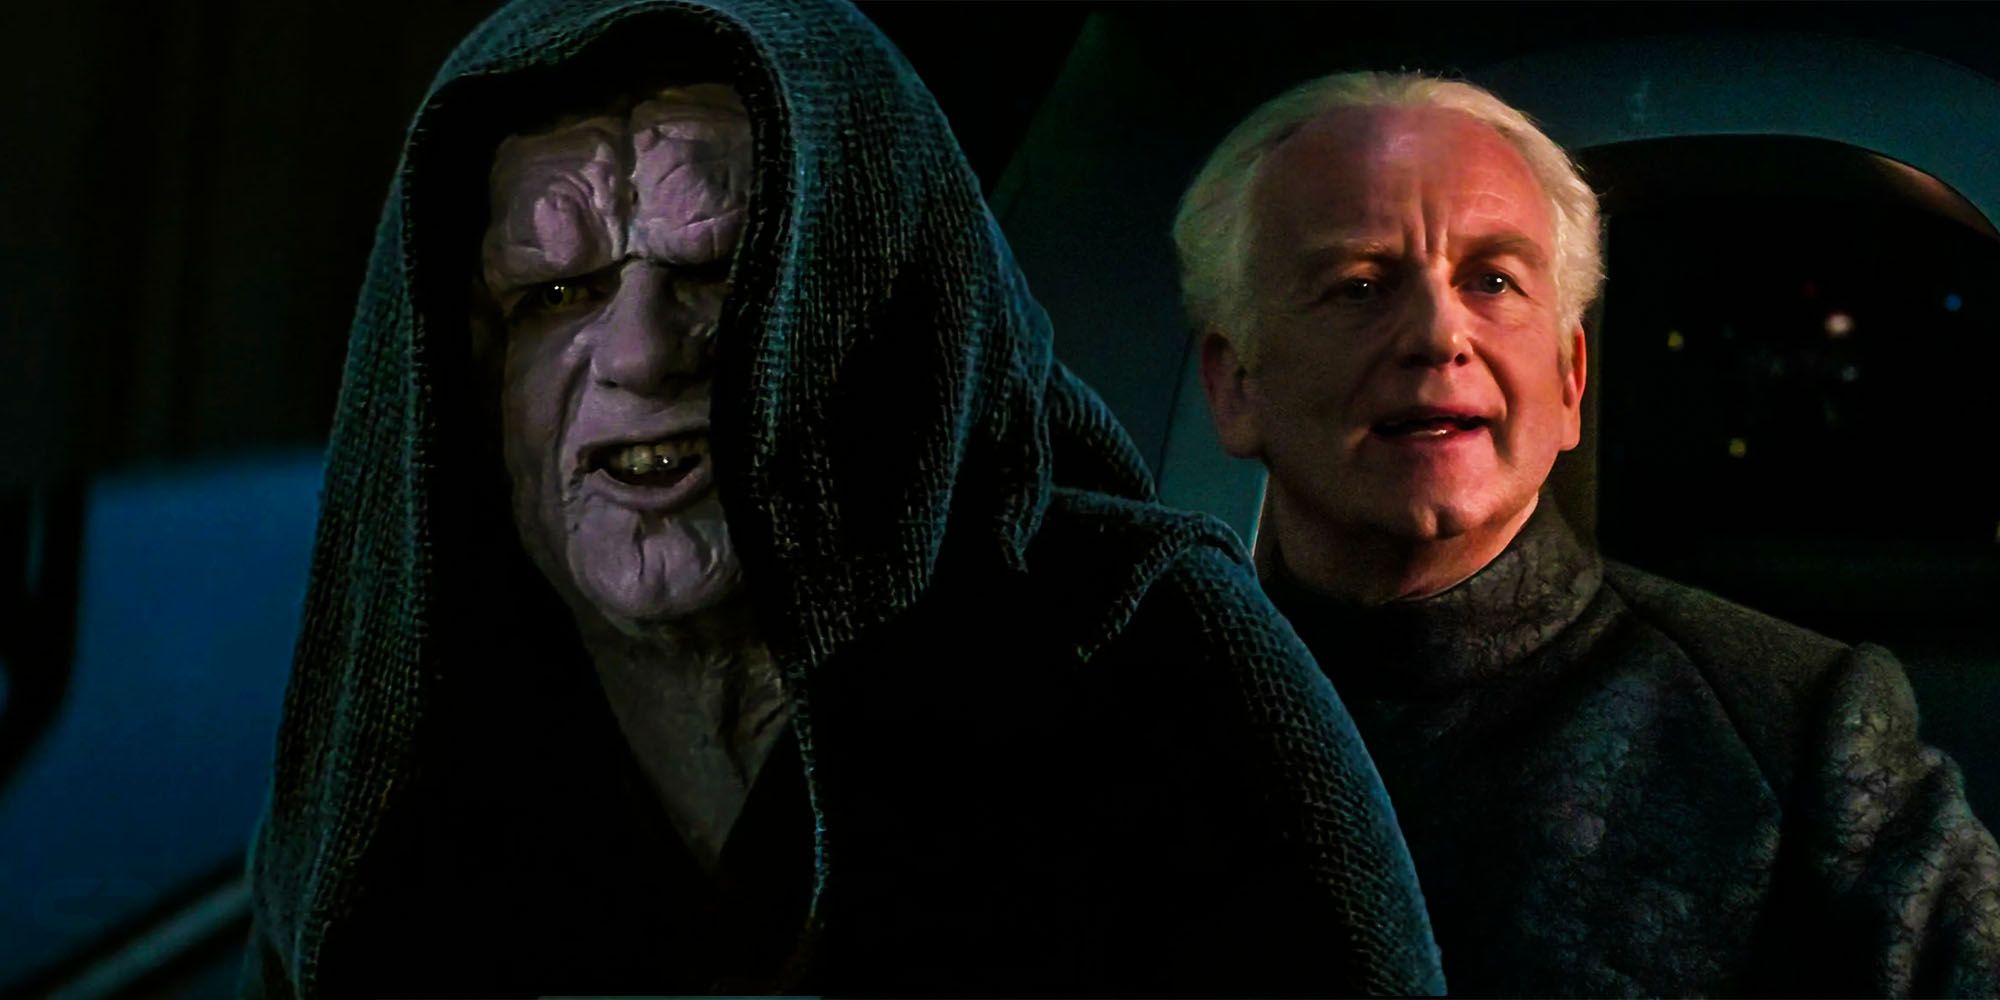 Darth sidious the emperor is never called palpatine in original star wars trilogy